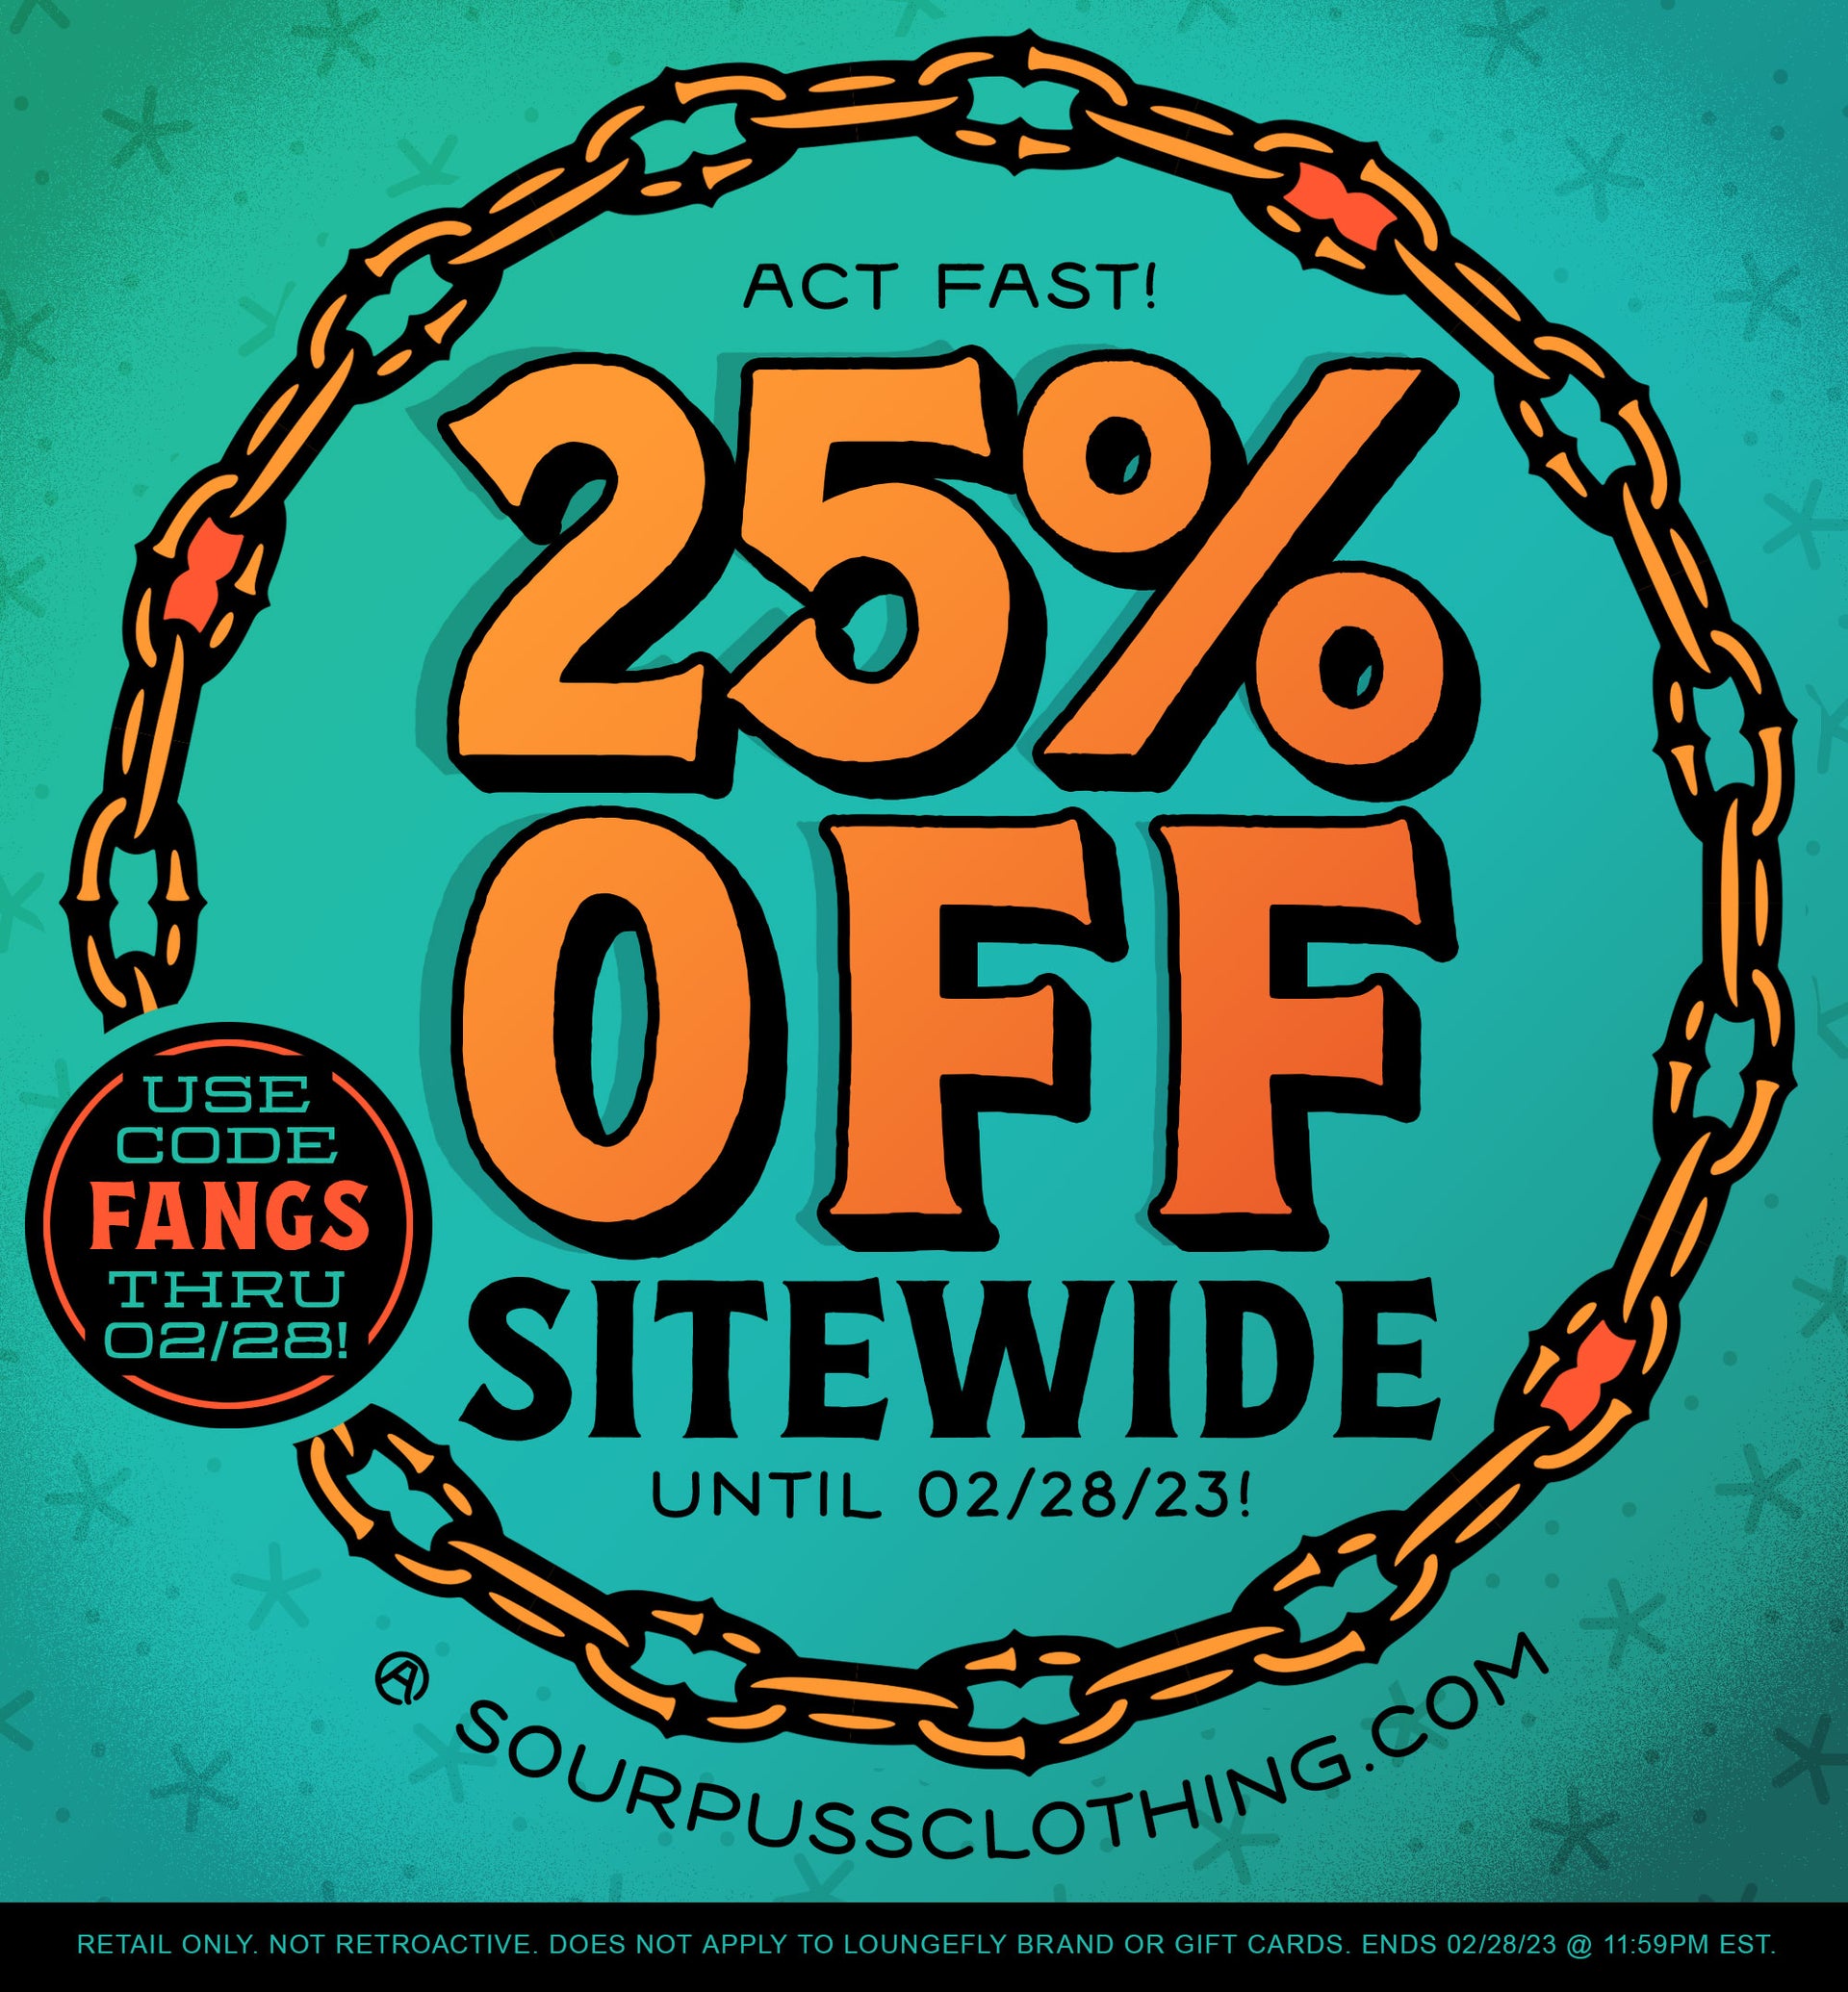 YOU READ RIGHT! 25% OFF SITEWIDE!